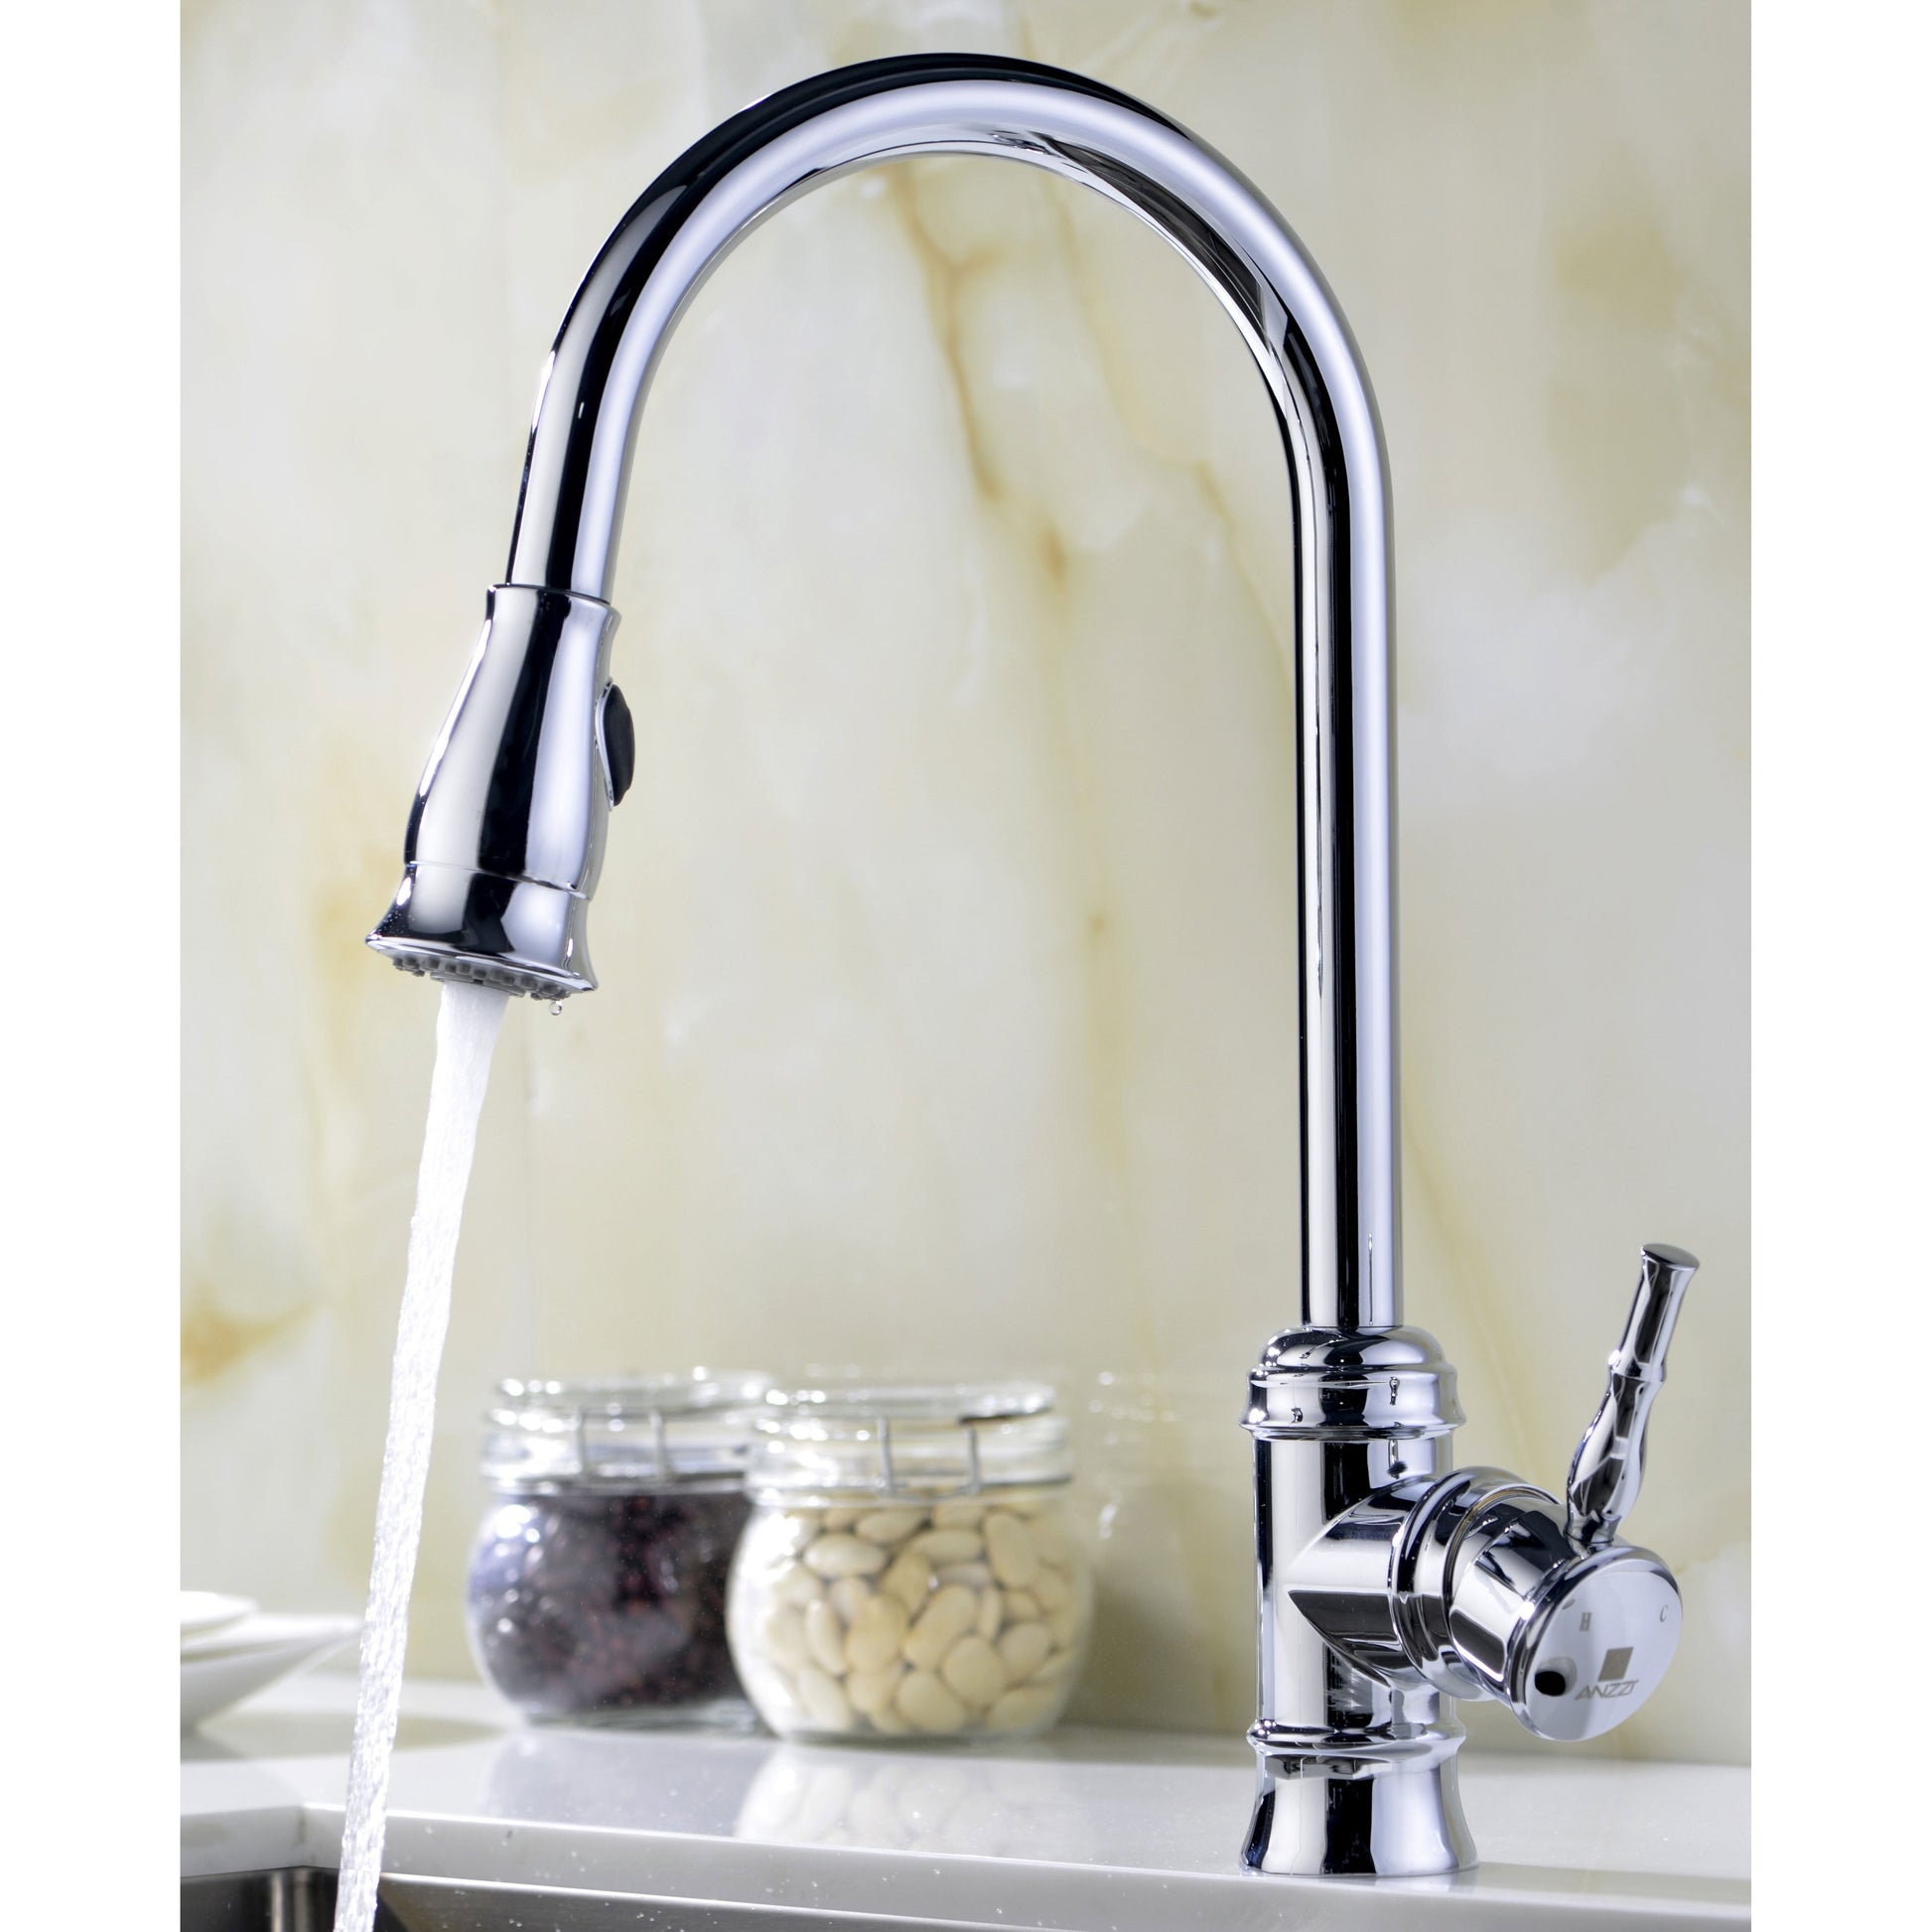 ANZZI Elysian Series 36" Single Basin Stainless Steel Farmhouse Kitchen Sink With Strainer and Polished Chrome Mend Faucet